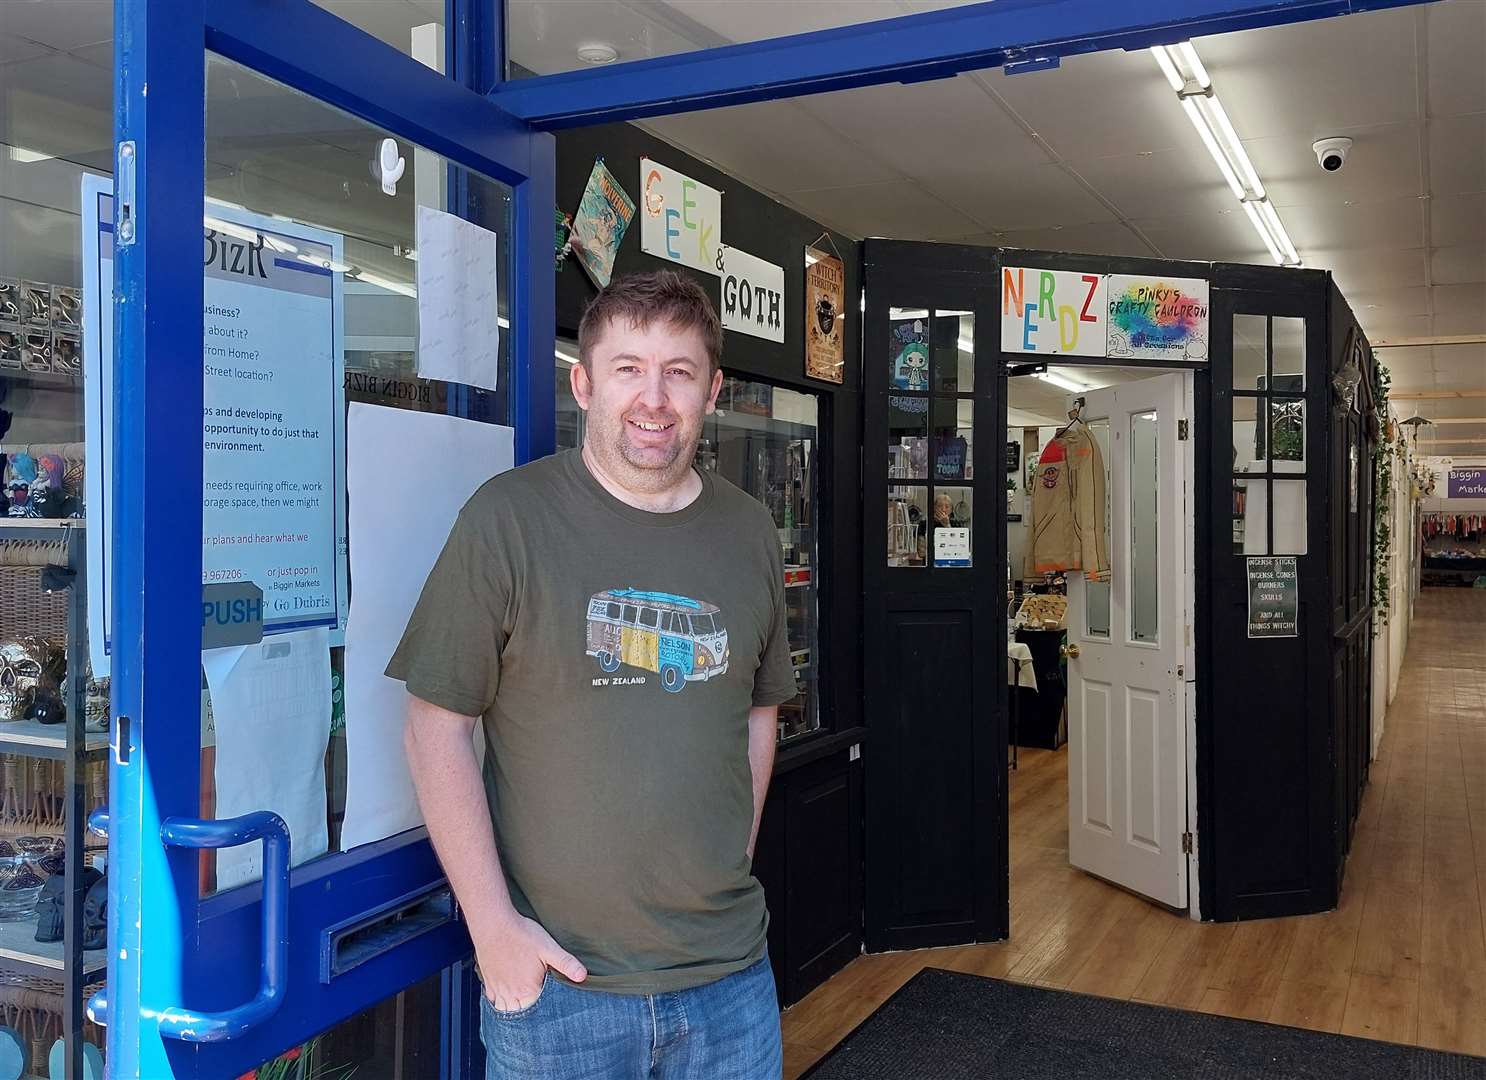 Mark Burford from Jayne's photography and second-hand books in Biggin BizR, Dover